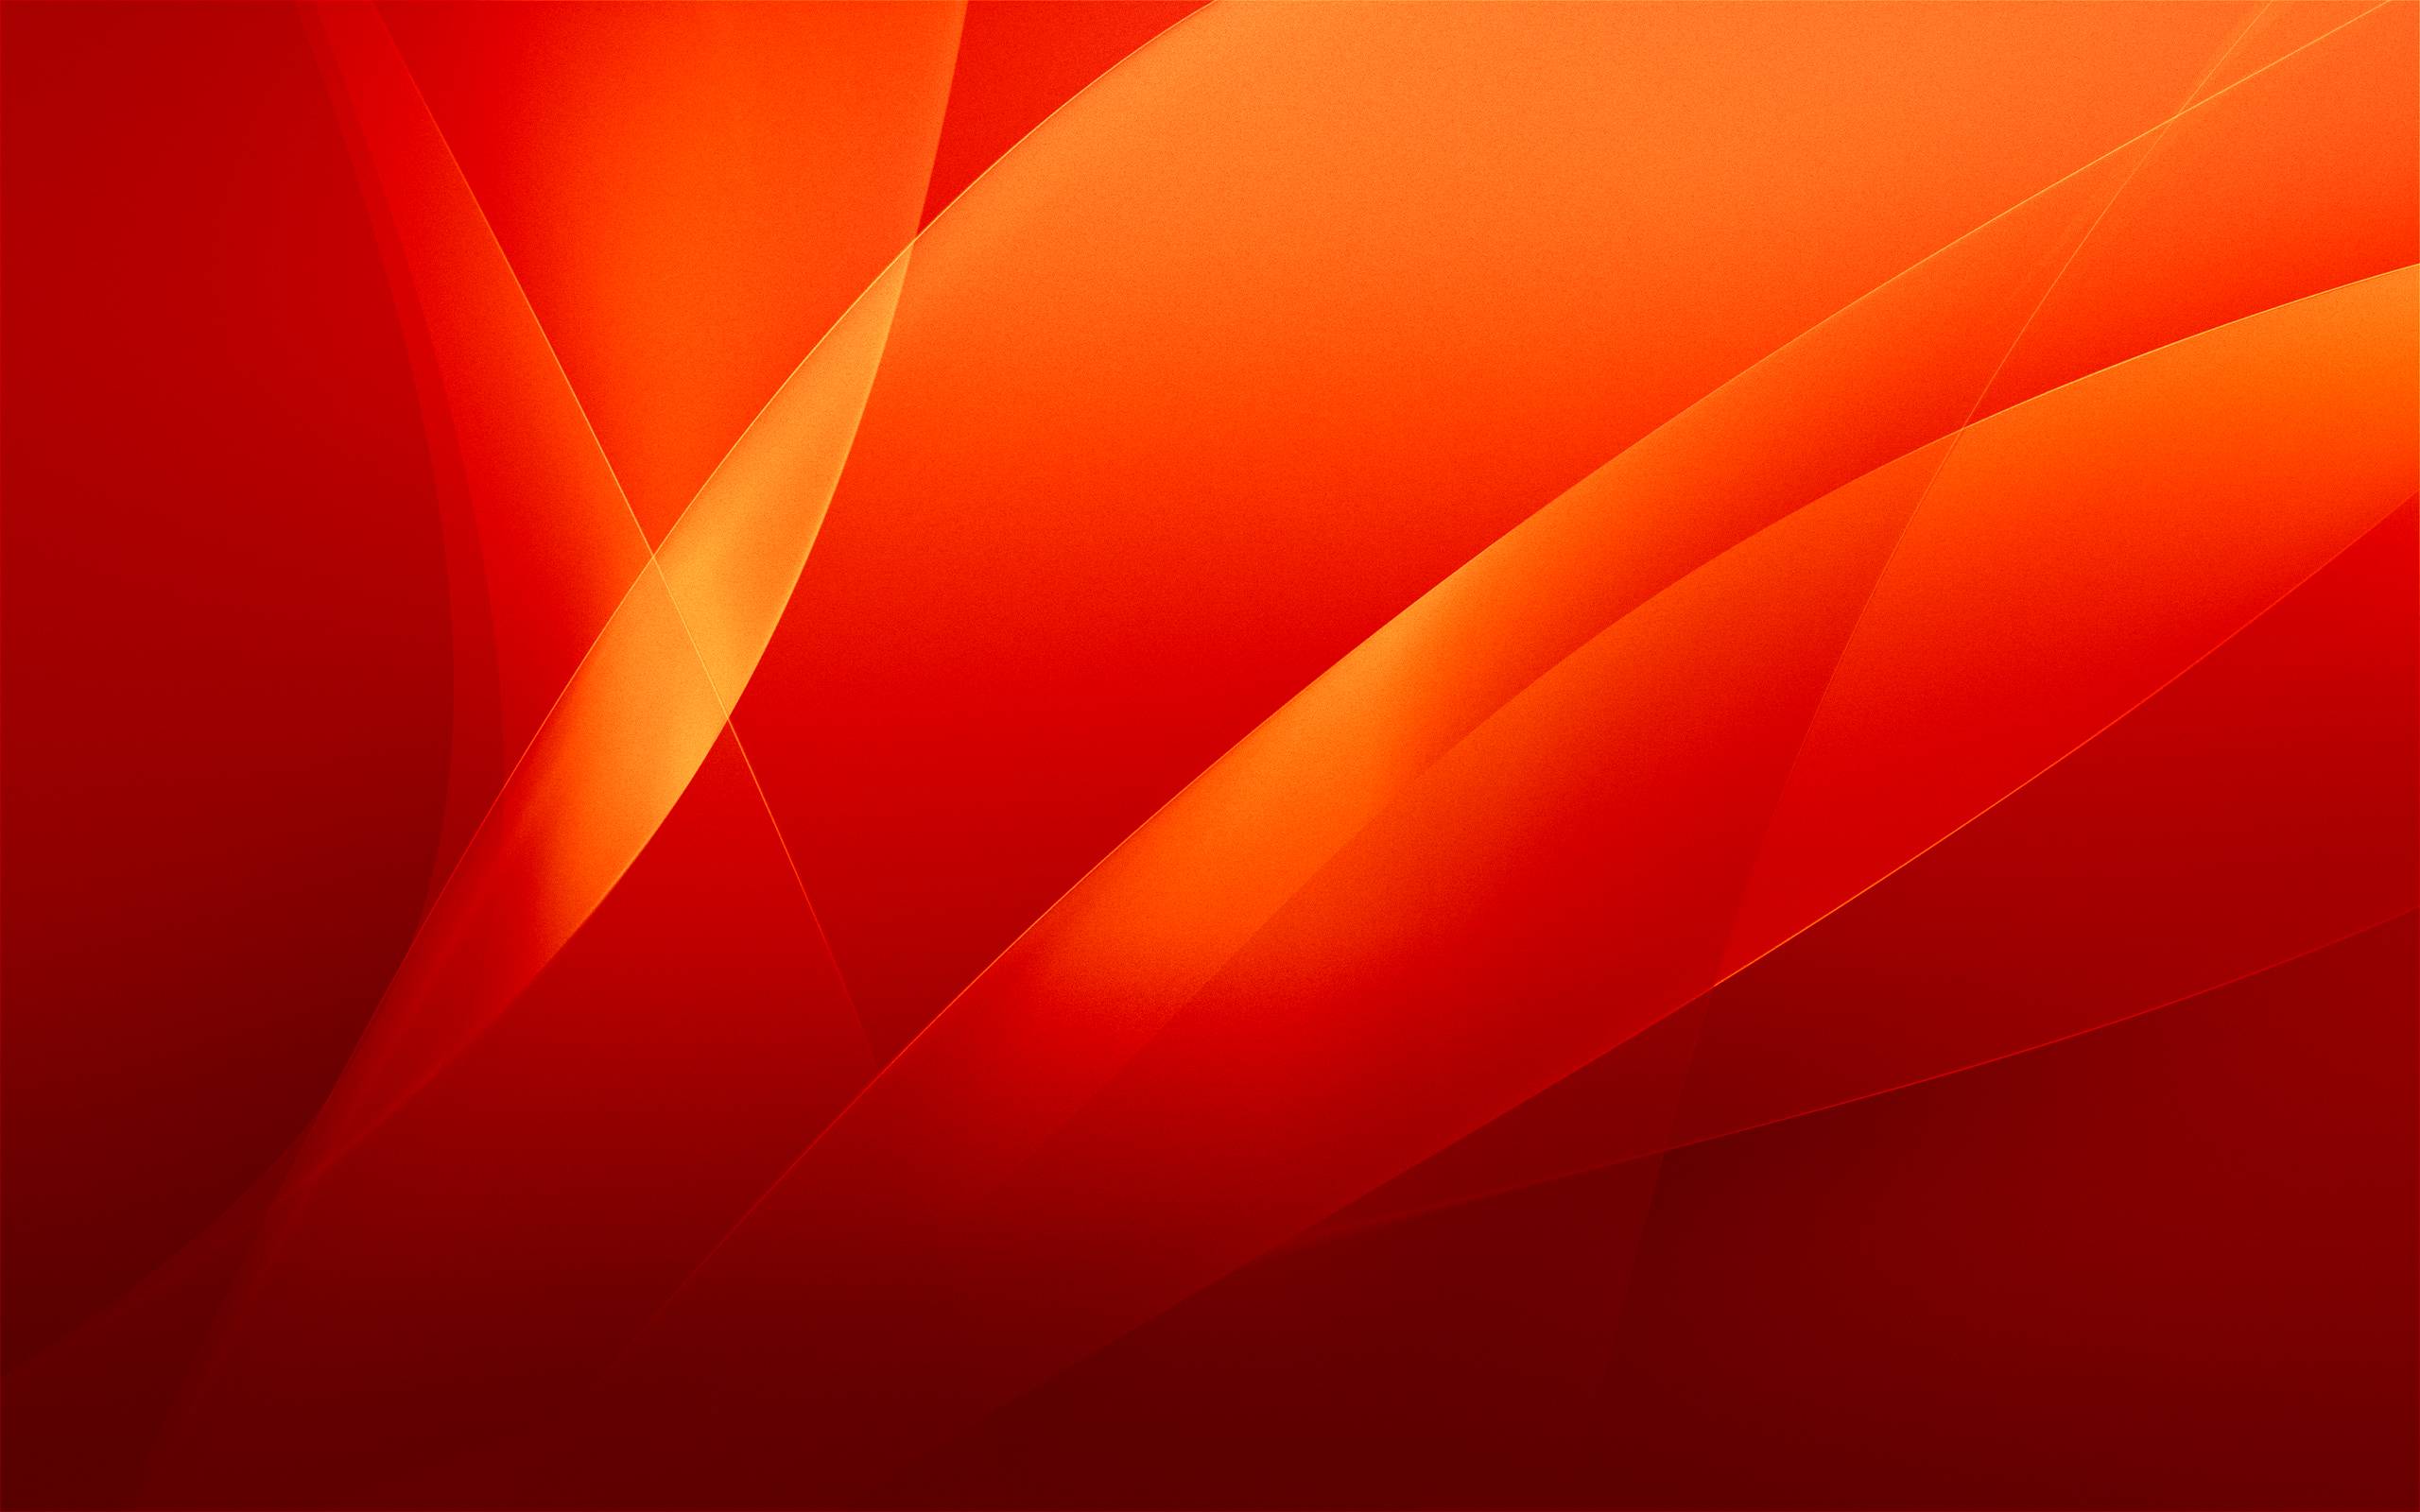 Red Background Pictures